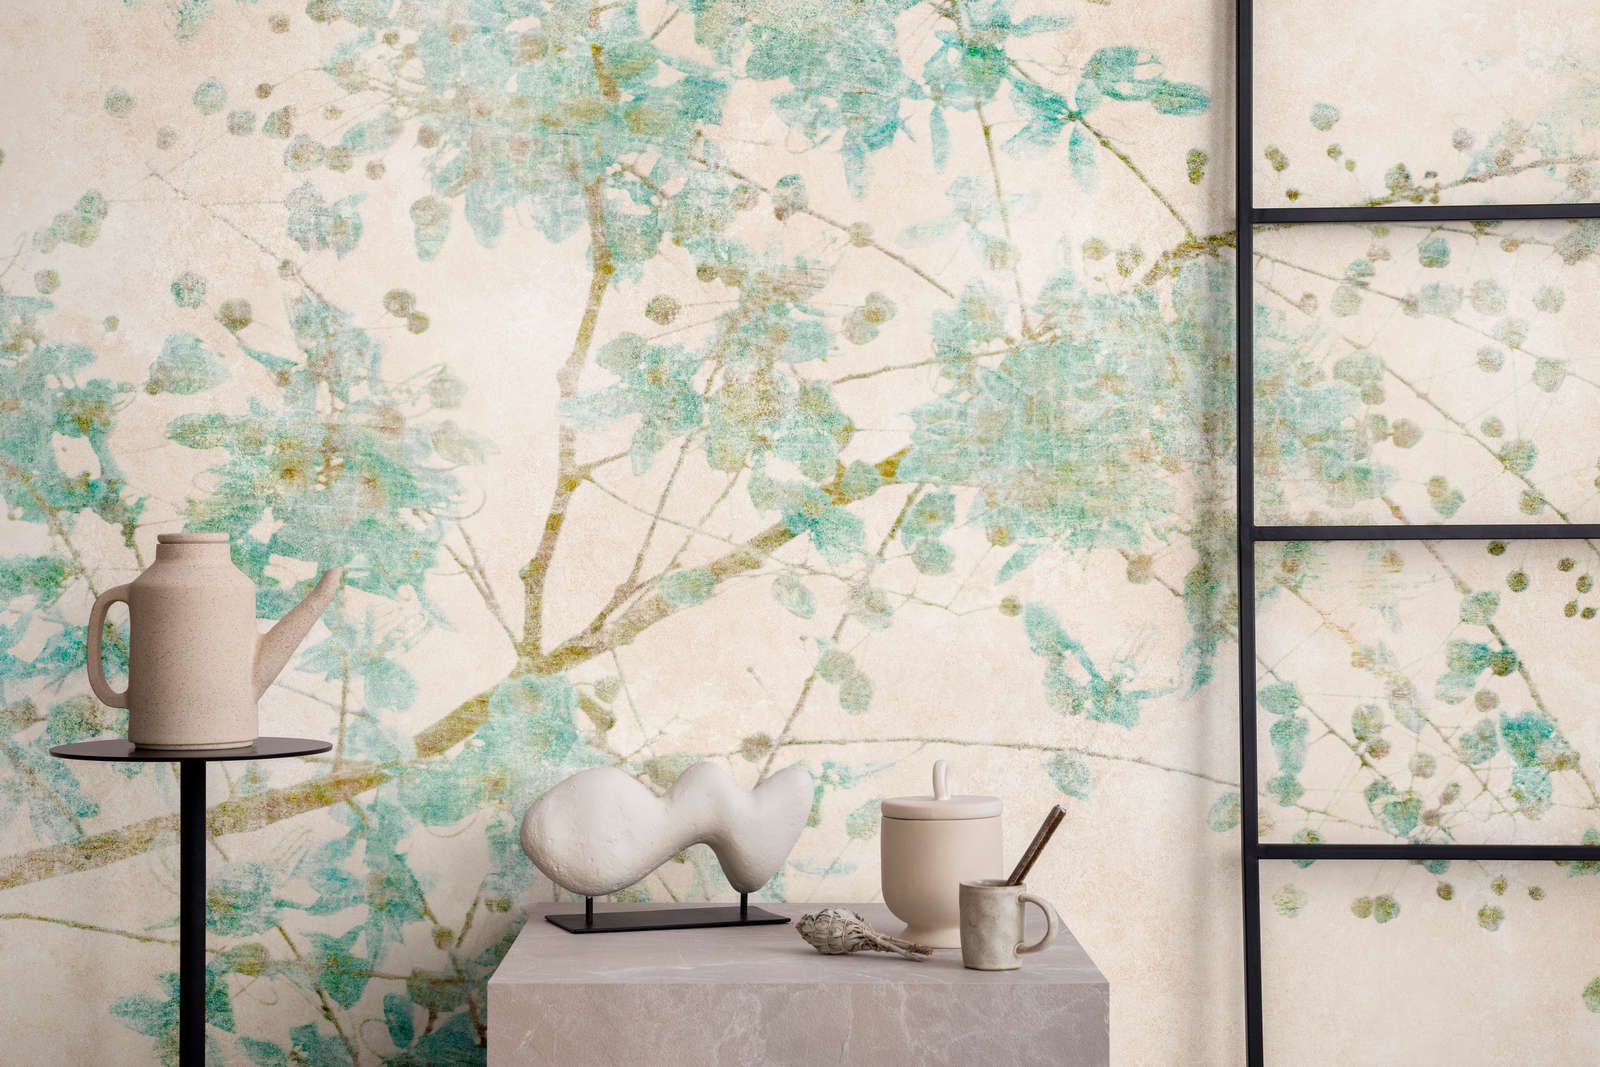             Photo wallpaper »nikko« - Branches in pale colours with vintage plaster texture in the background - Smooth, slightly pearlescent non-woven fabric
        